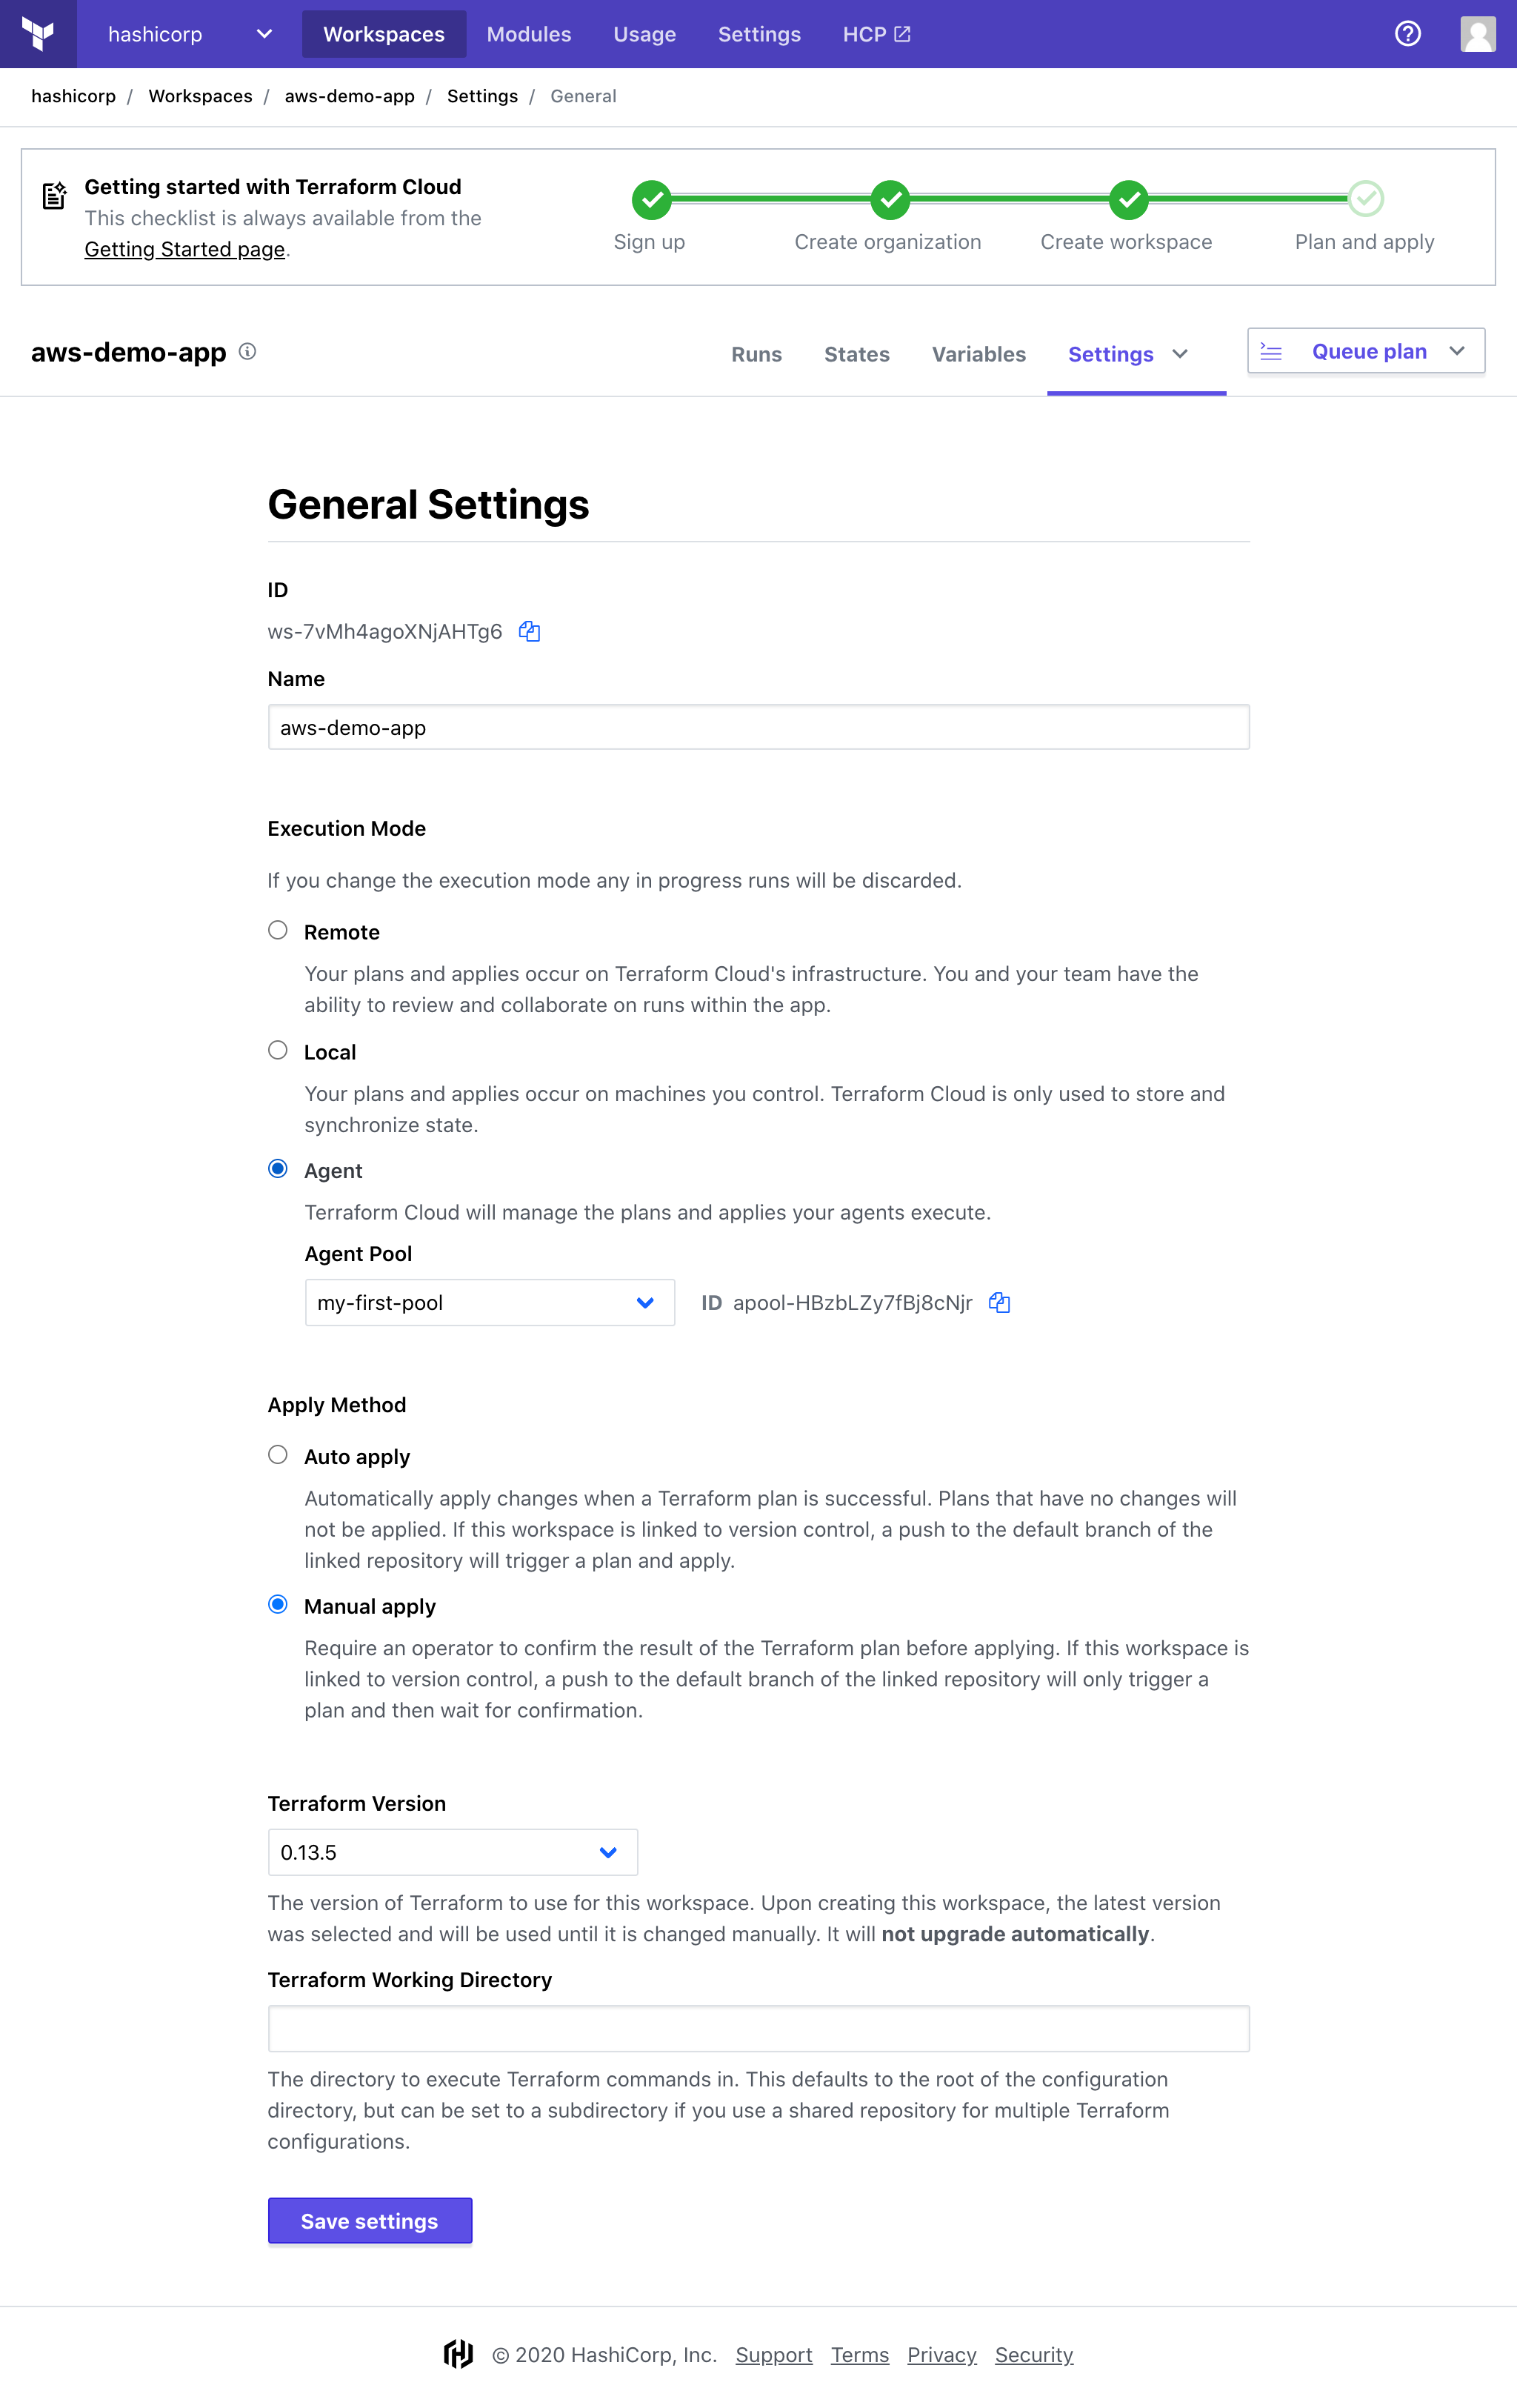 Screenshot: The Workspace General settings page, with agent selected for execution mode